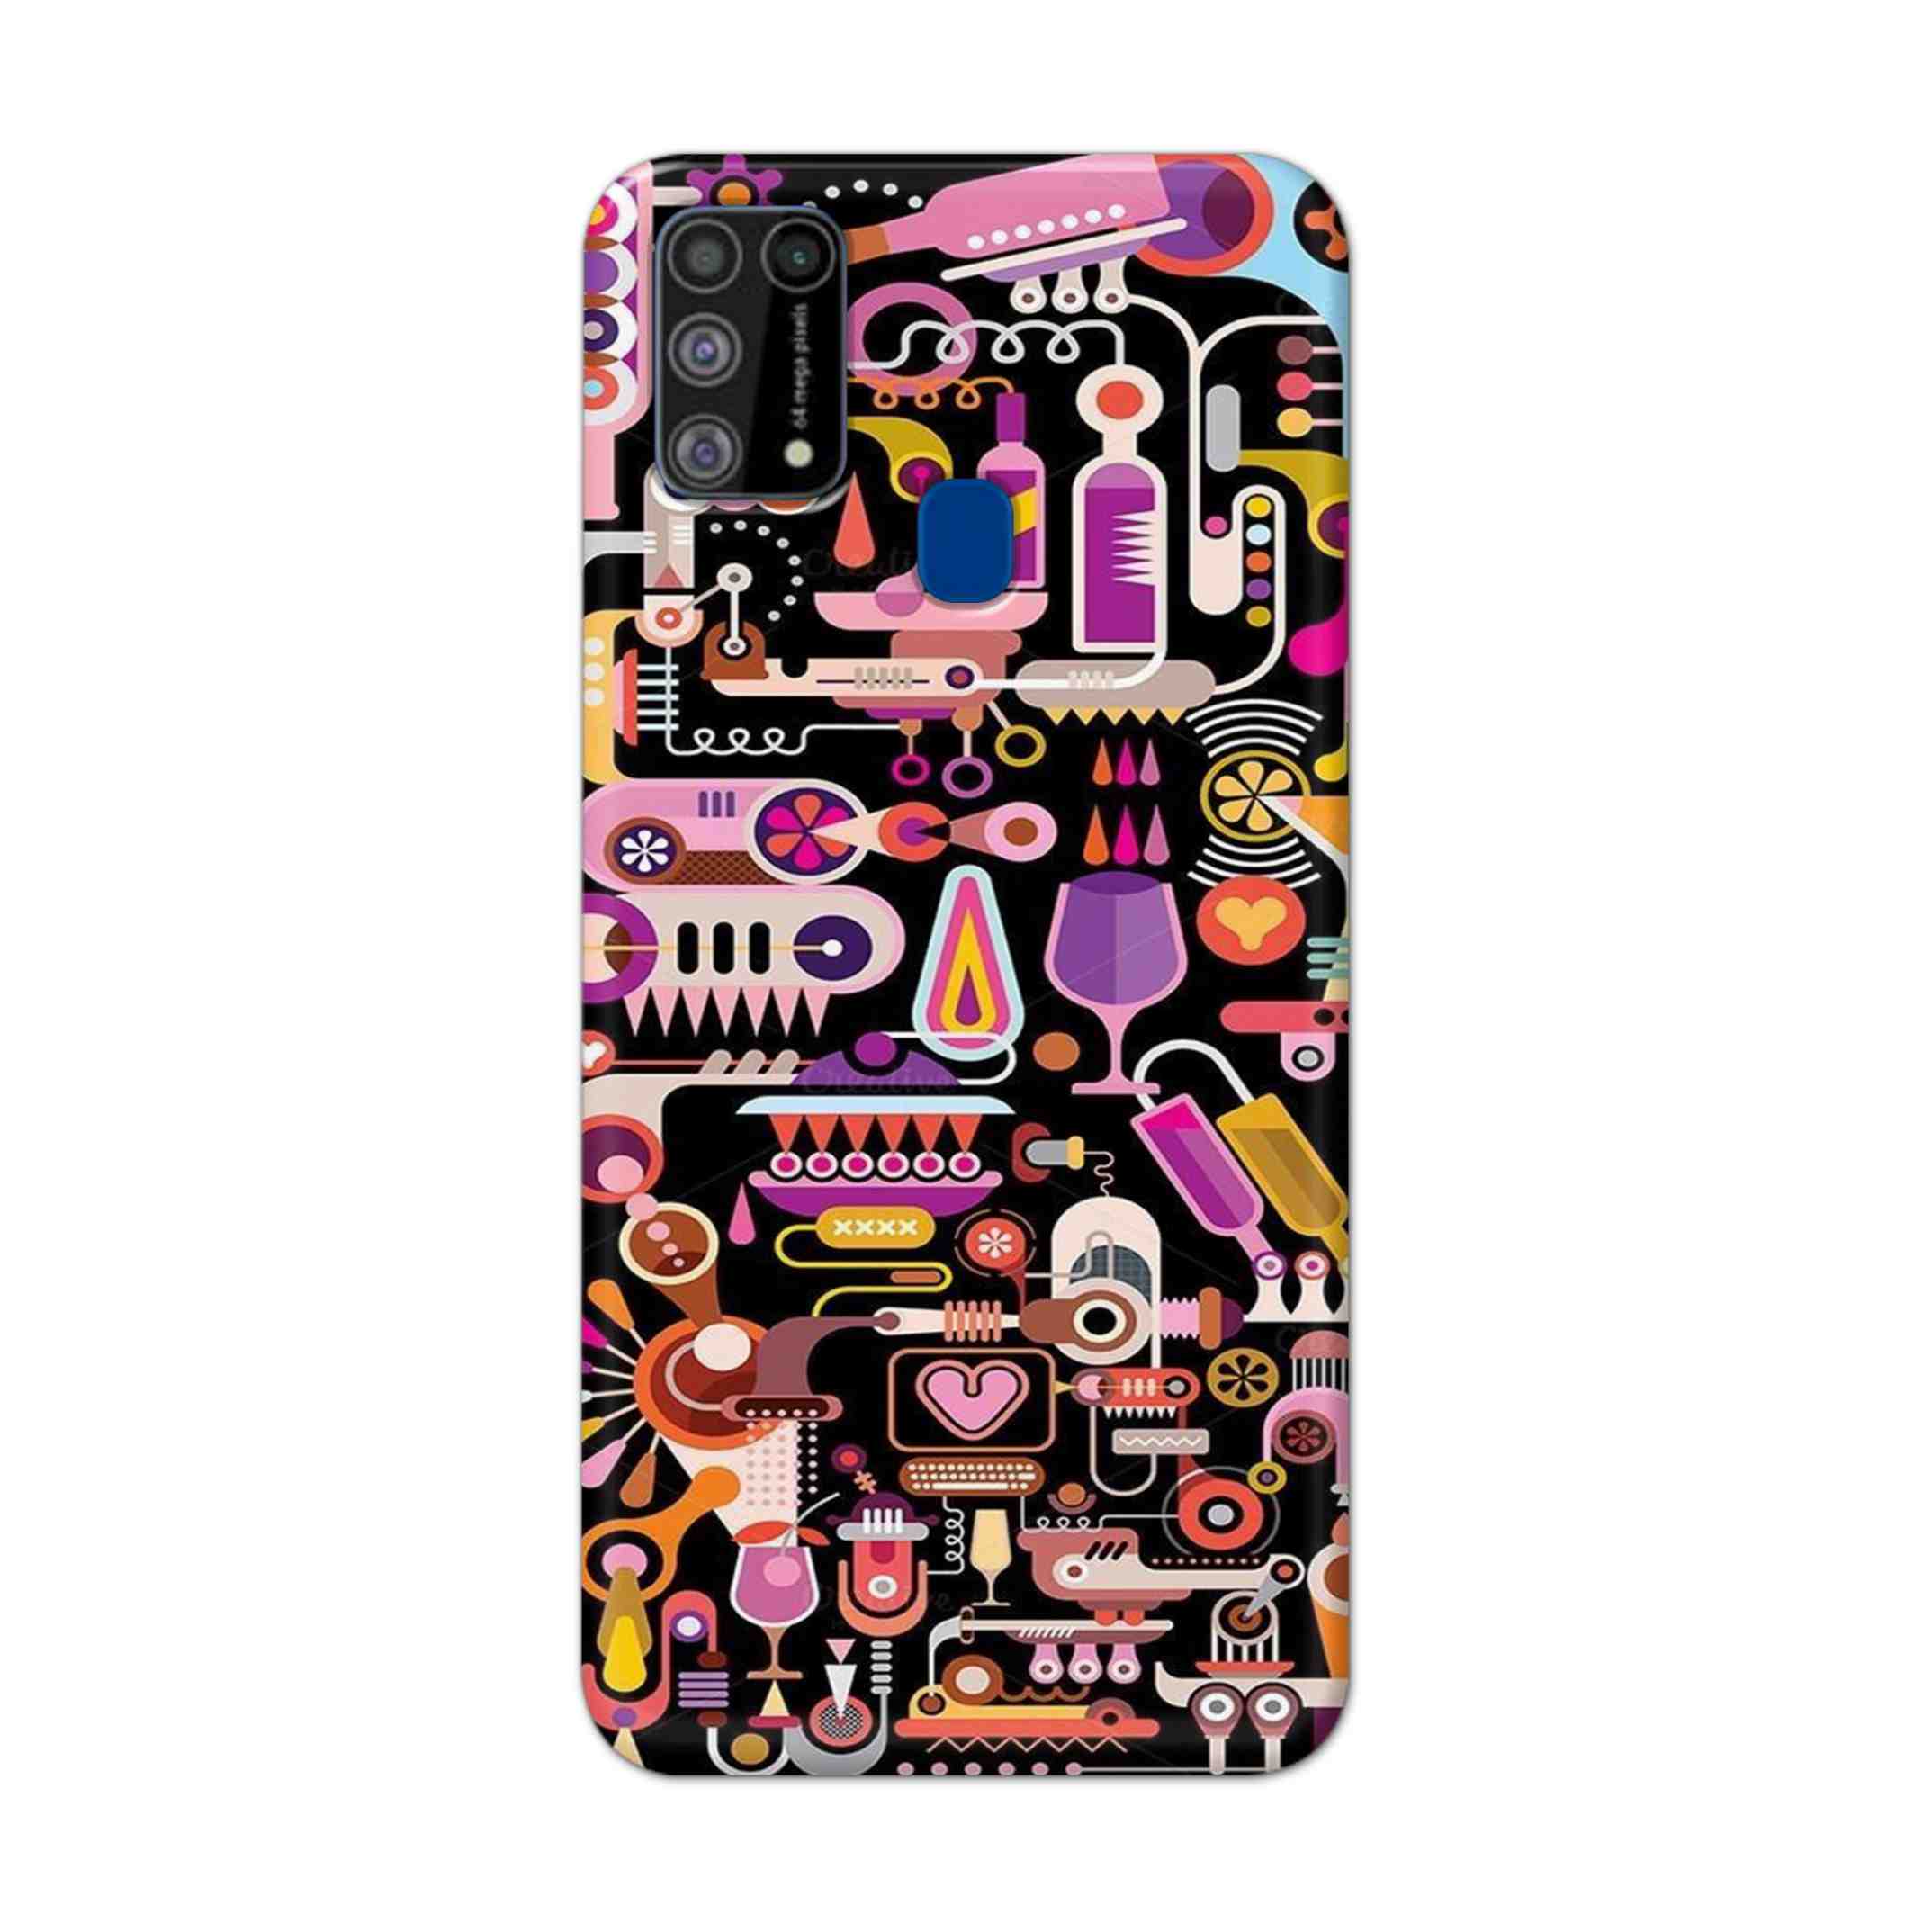 Buy Lab Art Hard Back Mobile Phone Case Cover For Samsung Galaxy M31 Online